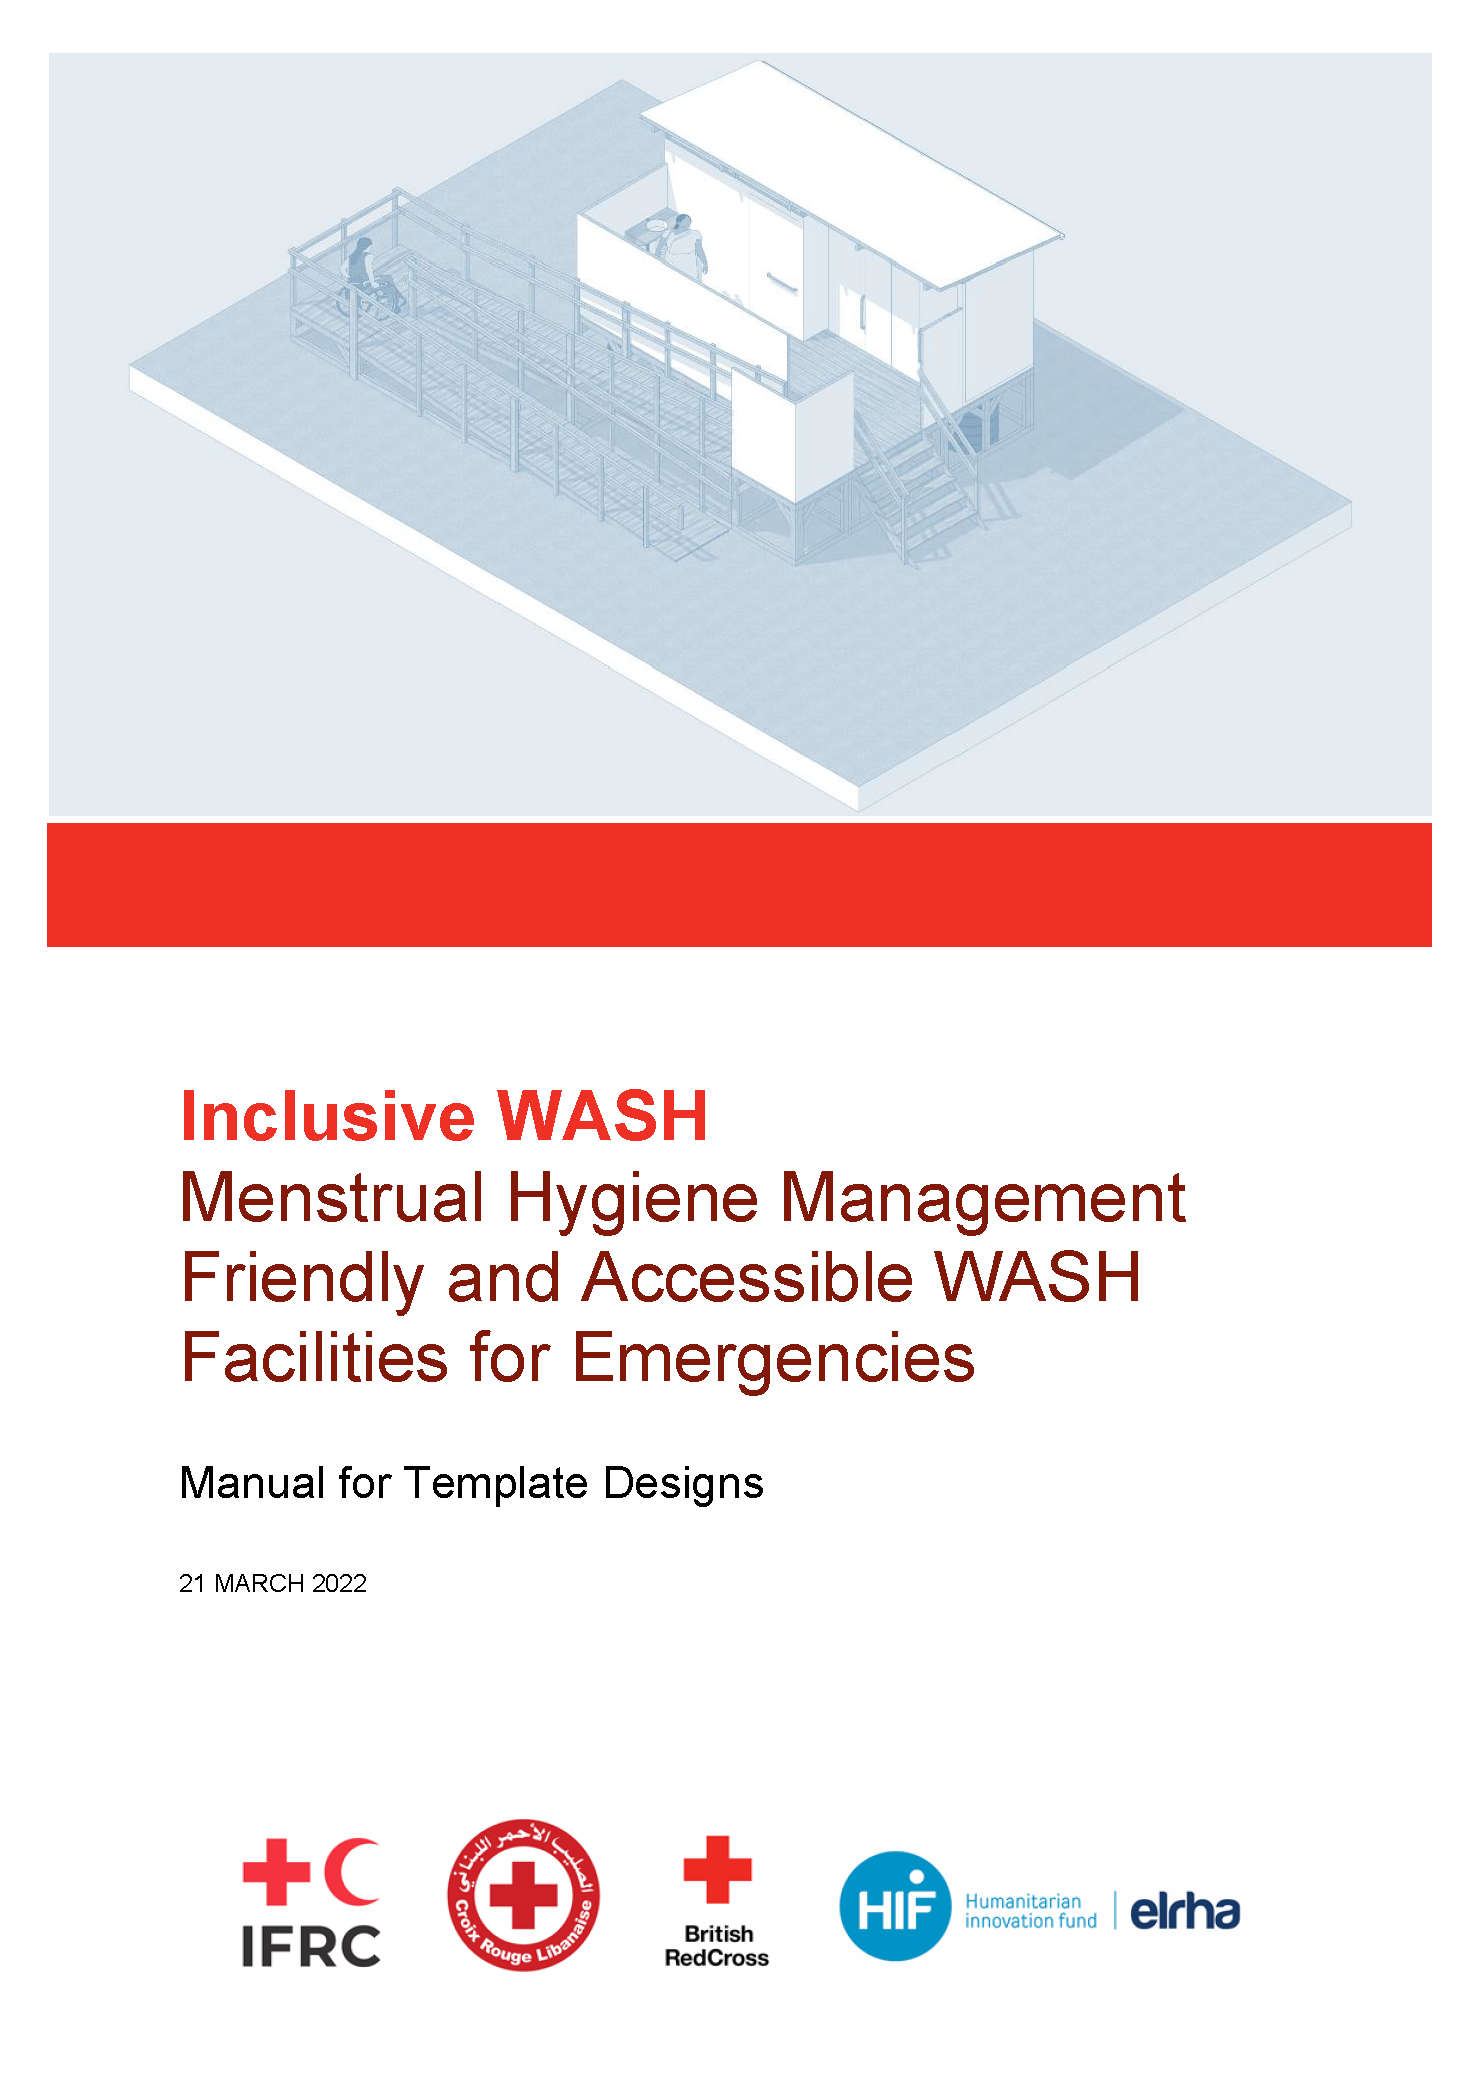 Cover page for Inclusive WASH Menstrual Hygiene Management Friendly and Accessible WASH Facilities for Emergencies